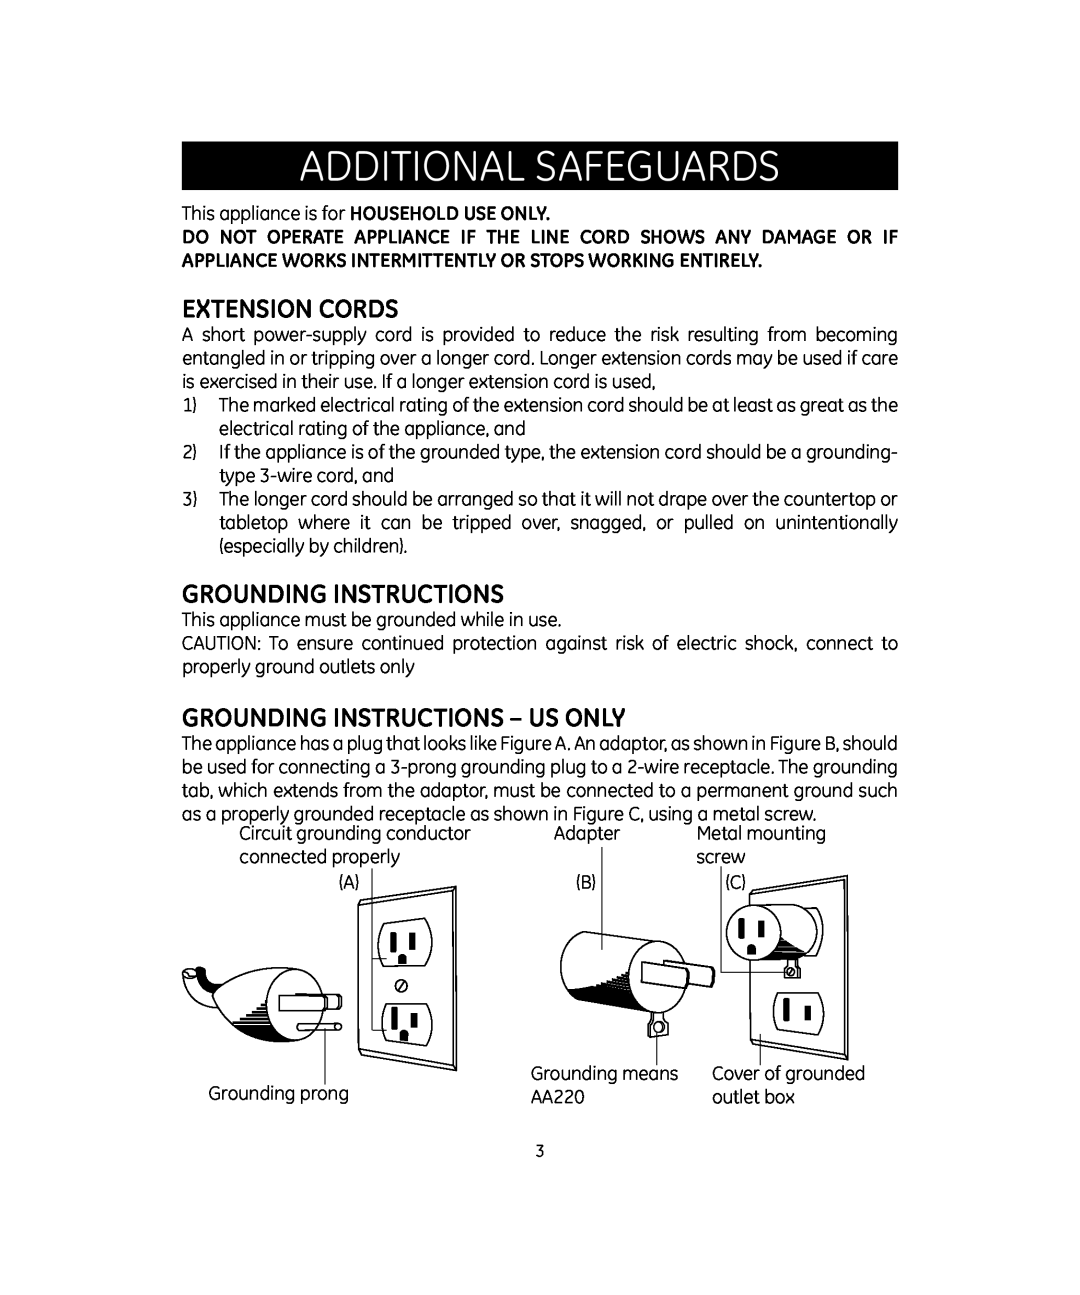 GE 681131691994 manual Additional Safeguards, Extension Cords, Grounding Instructions - Us Only 